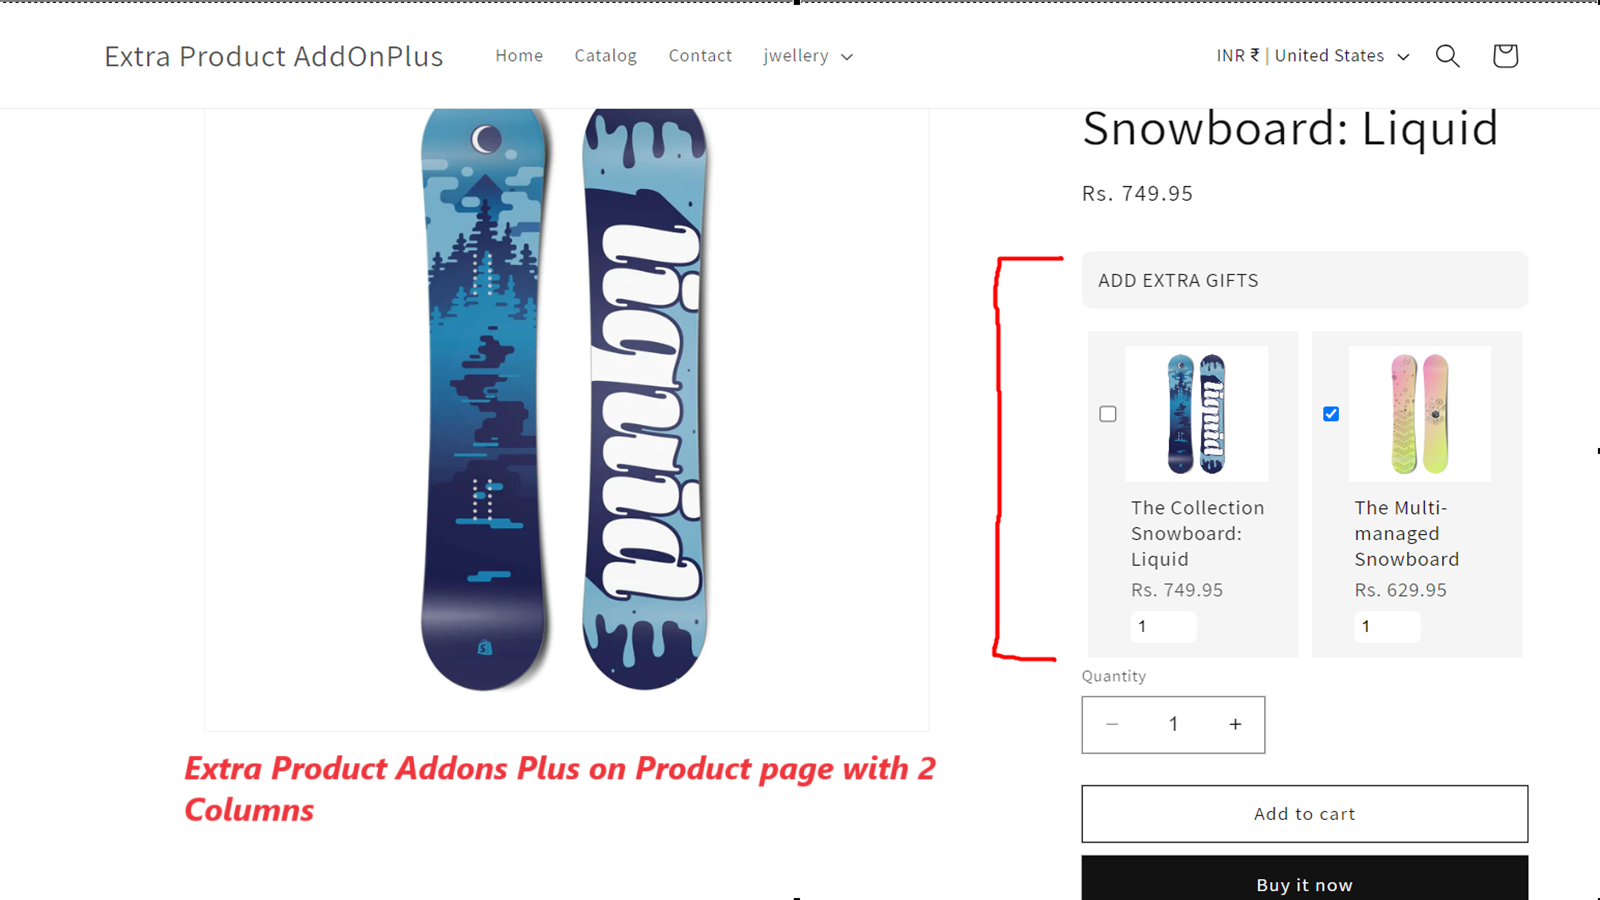 Extra Product Addons Plus product page with 2 column